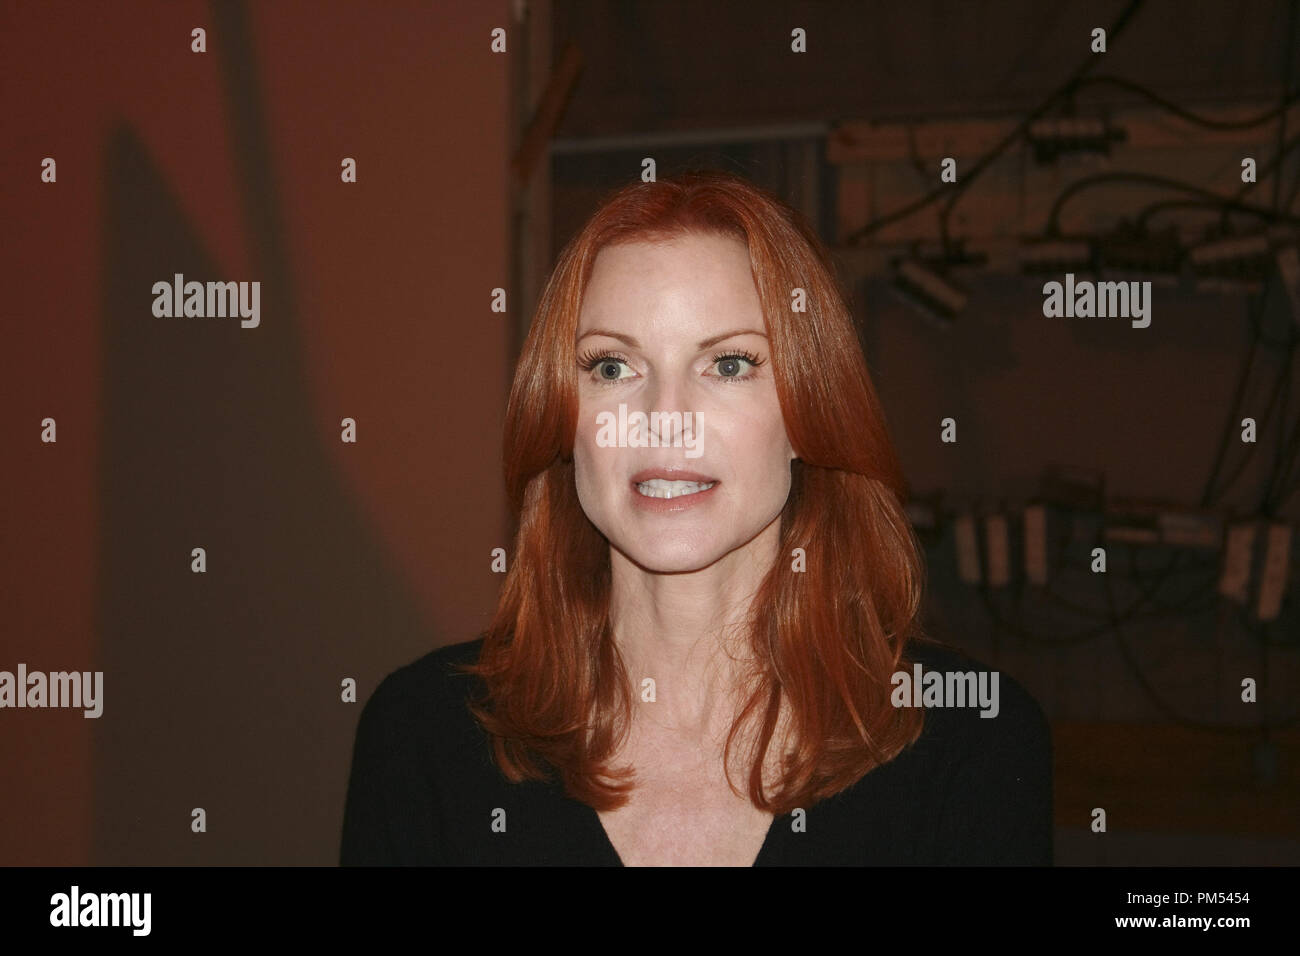 Marcia Cross 'Desperate Housewives'  Portrait Session, July 27, 2010.  Reproduction by American tabloids is absolutely forbidden. File Reference # 30383 015JRC  For Editorial Use Only -  All Rights Reserved Stock Photo